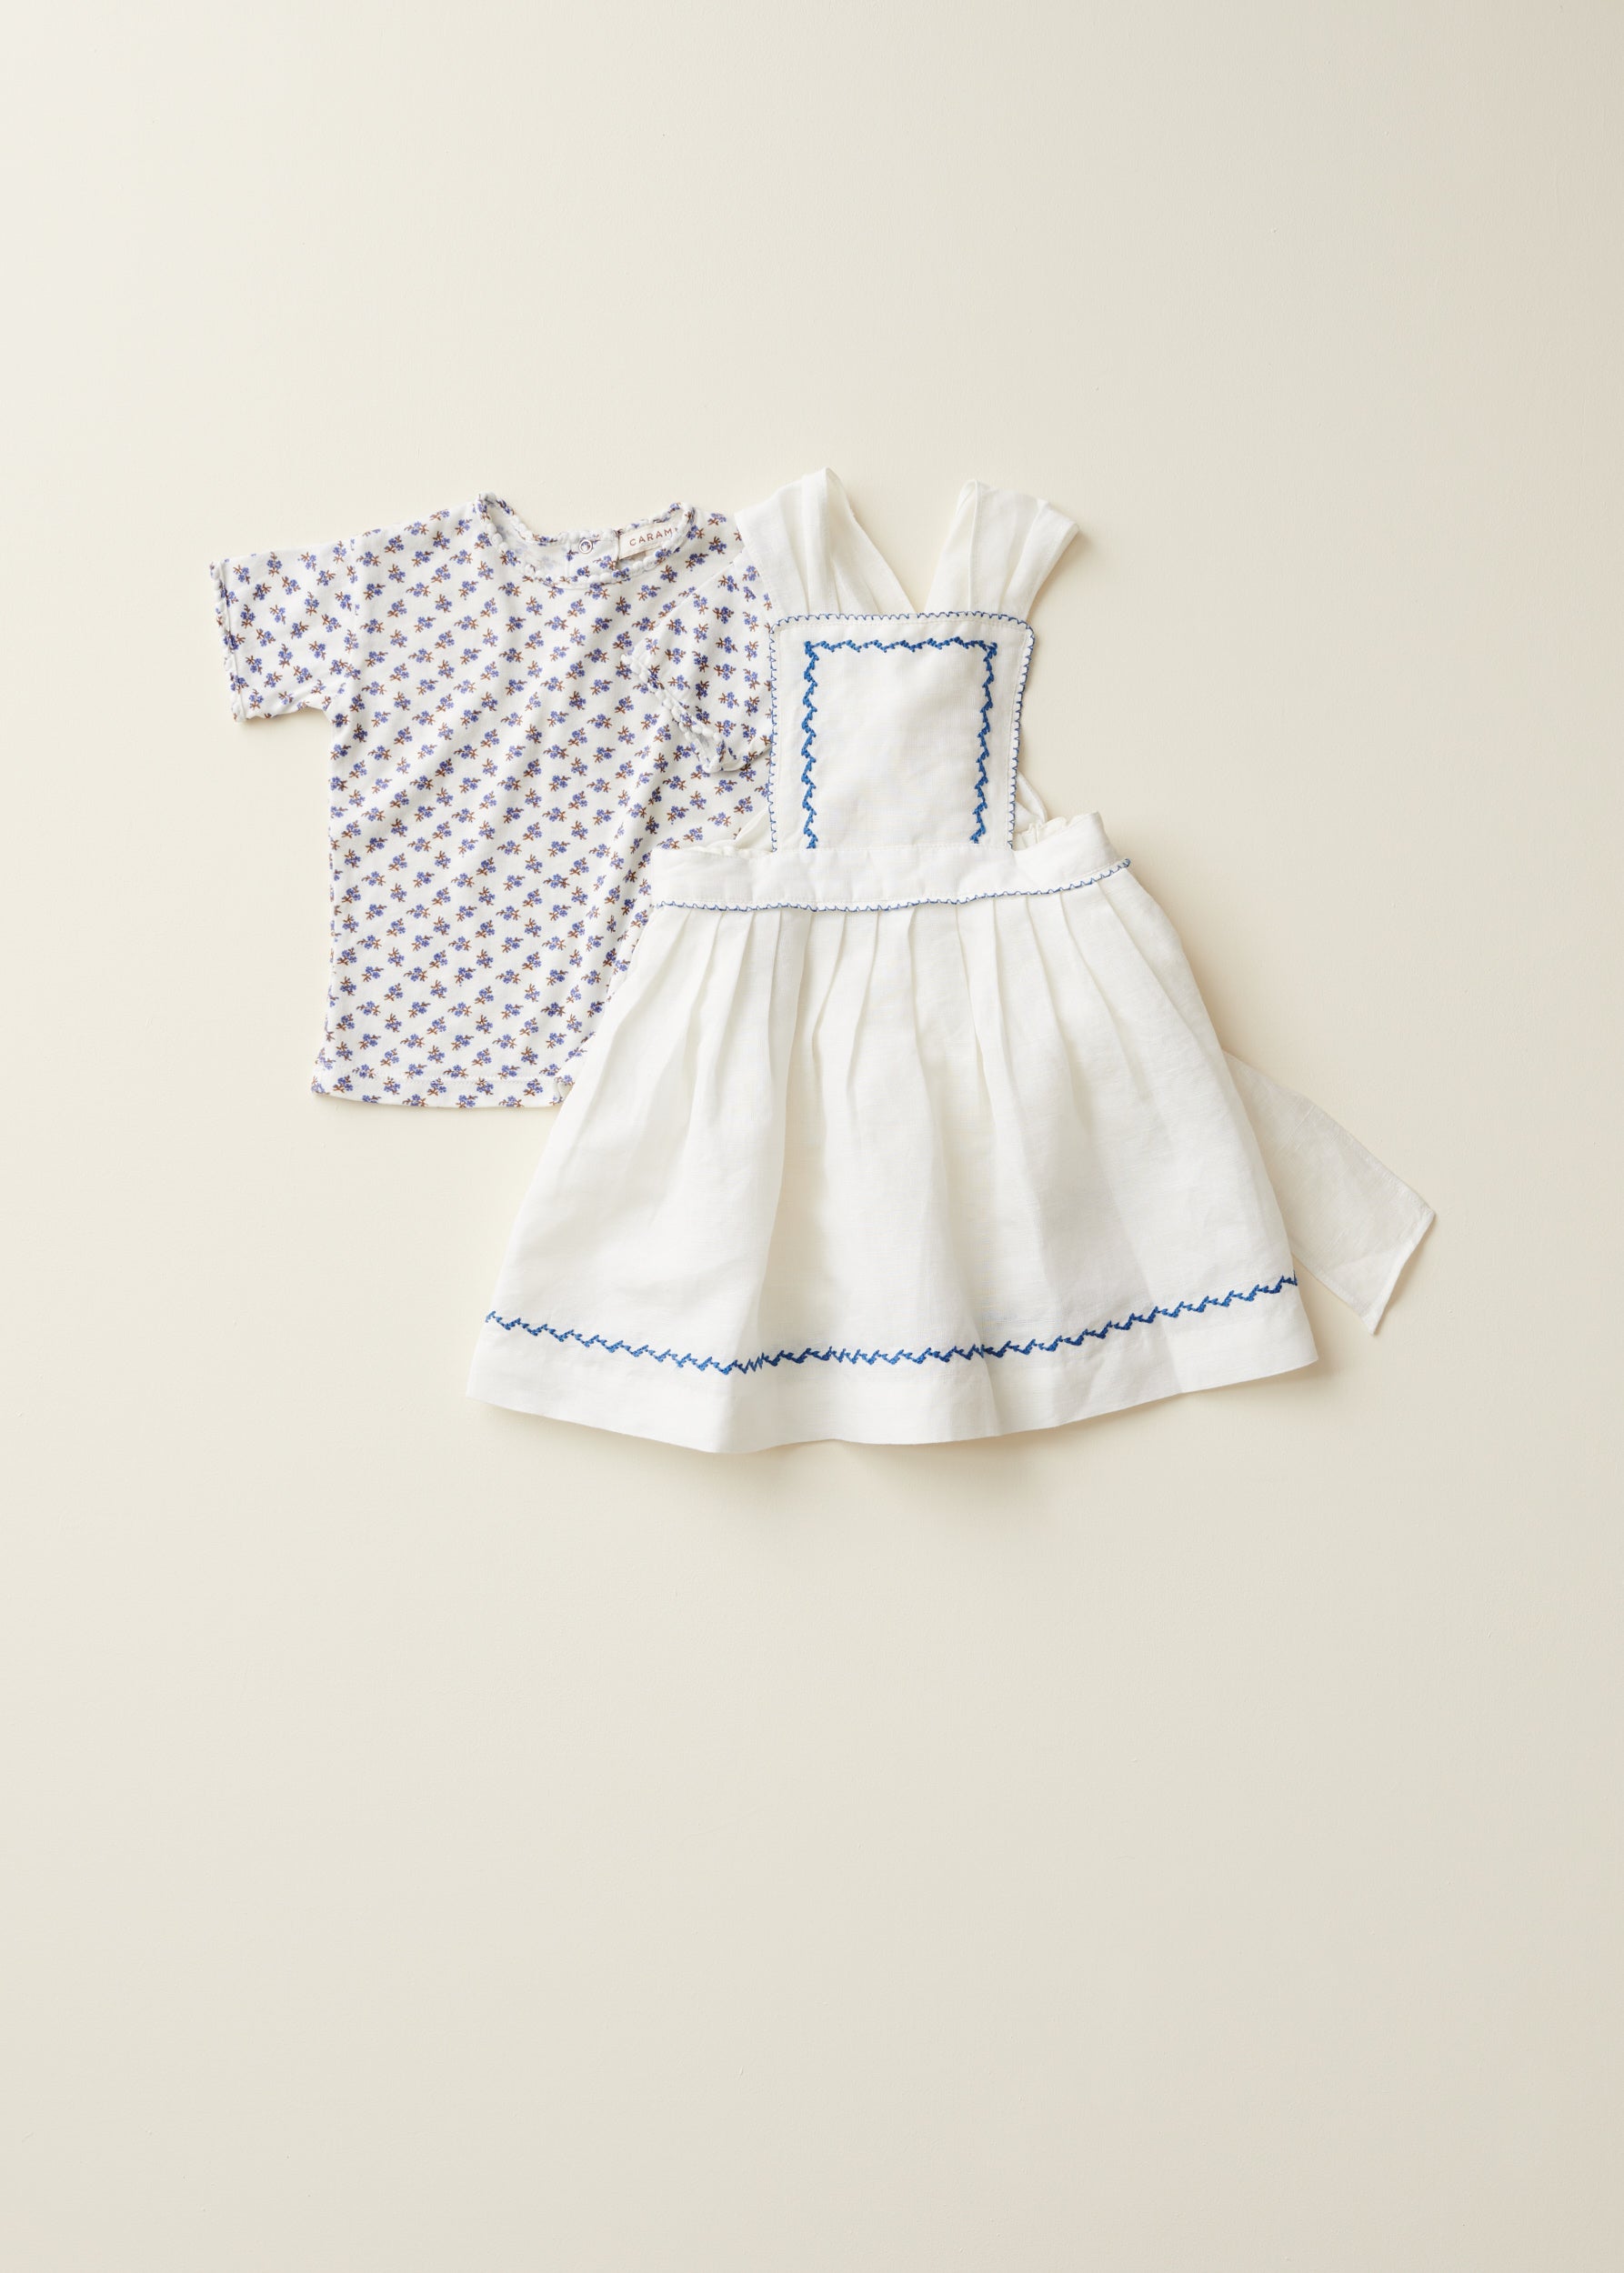 PEPPERMINT BABY DRESS - WHITE